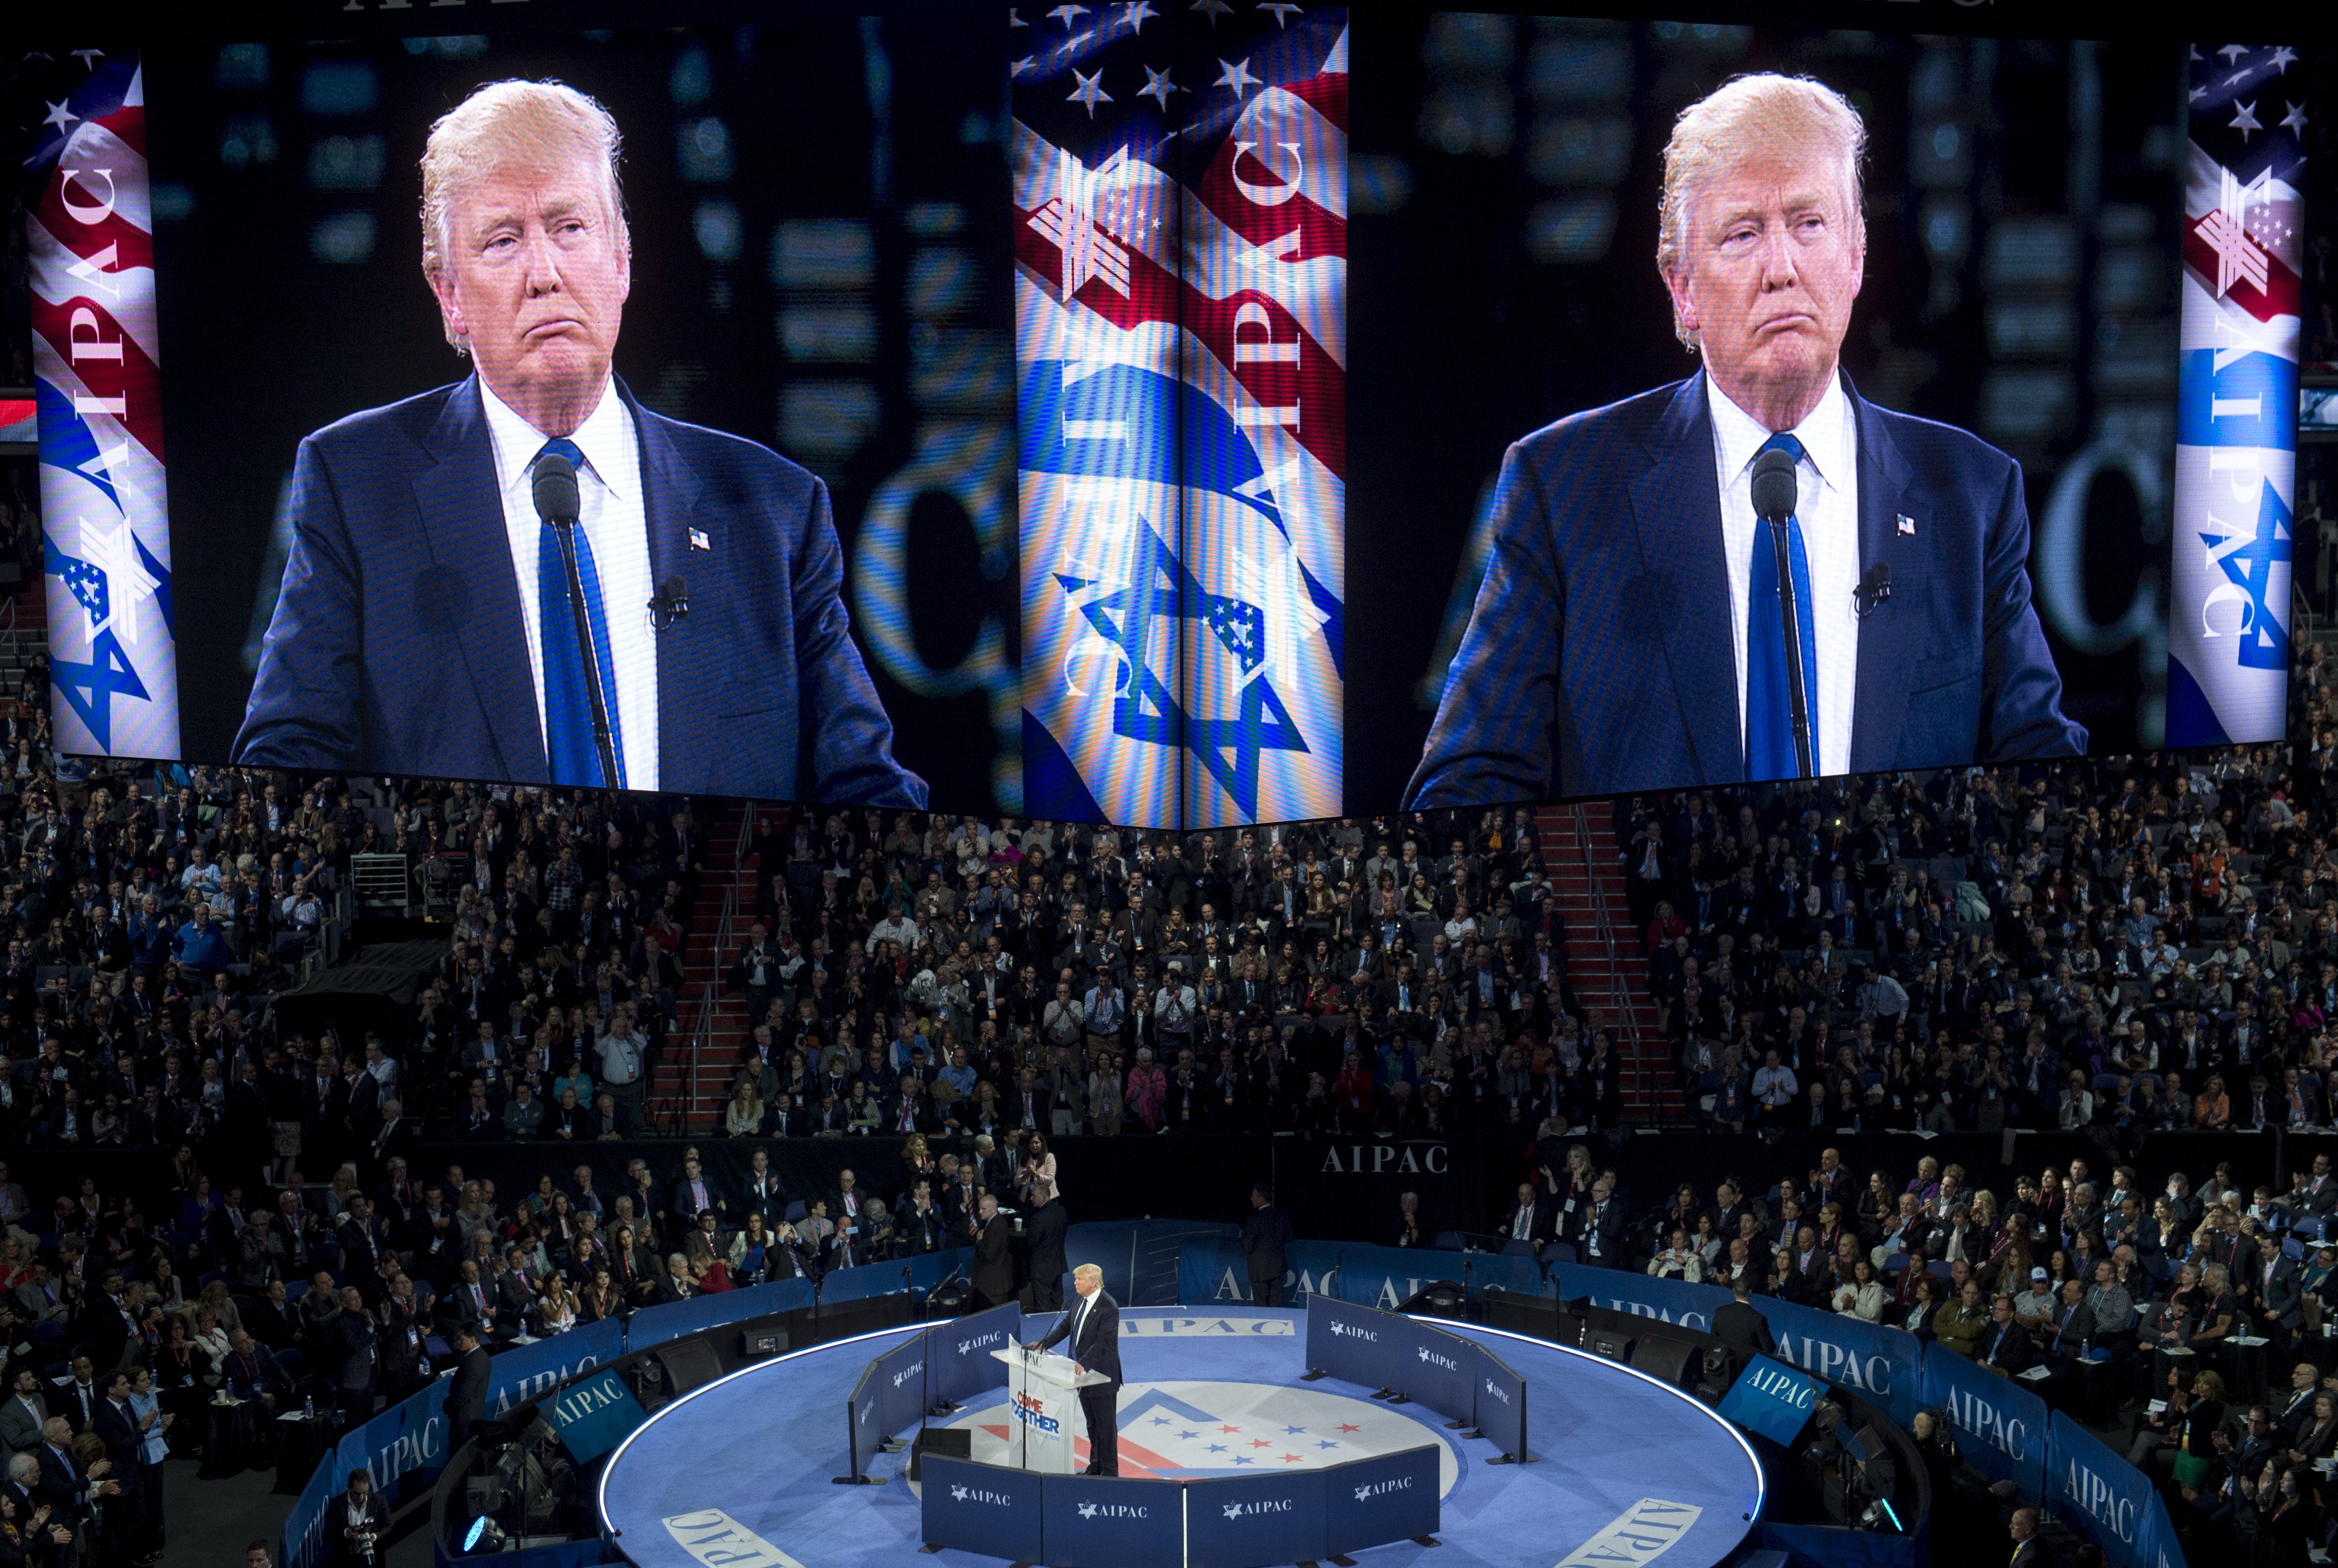 Donald Trump speaks during AIPAC in Washington, DC, on March 21, 2016. (Saul Loeb—AFP/Getty Images)